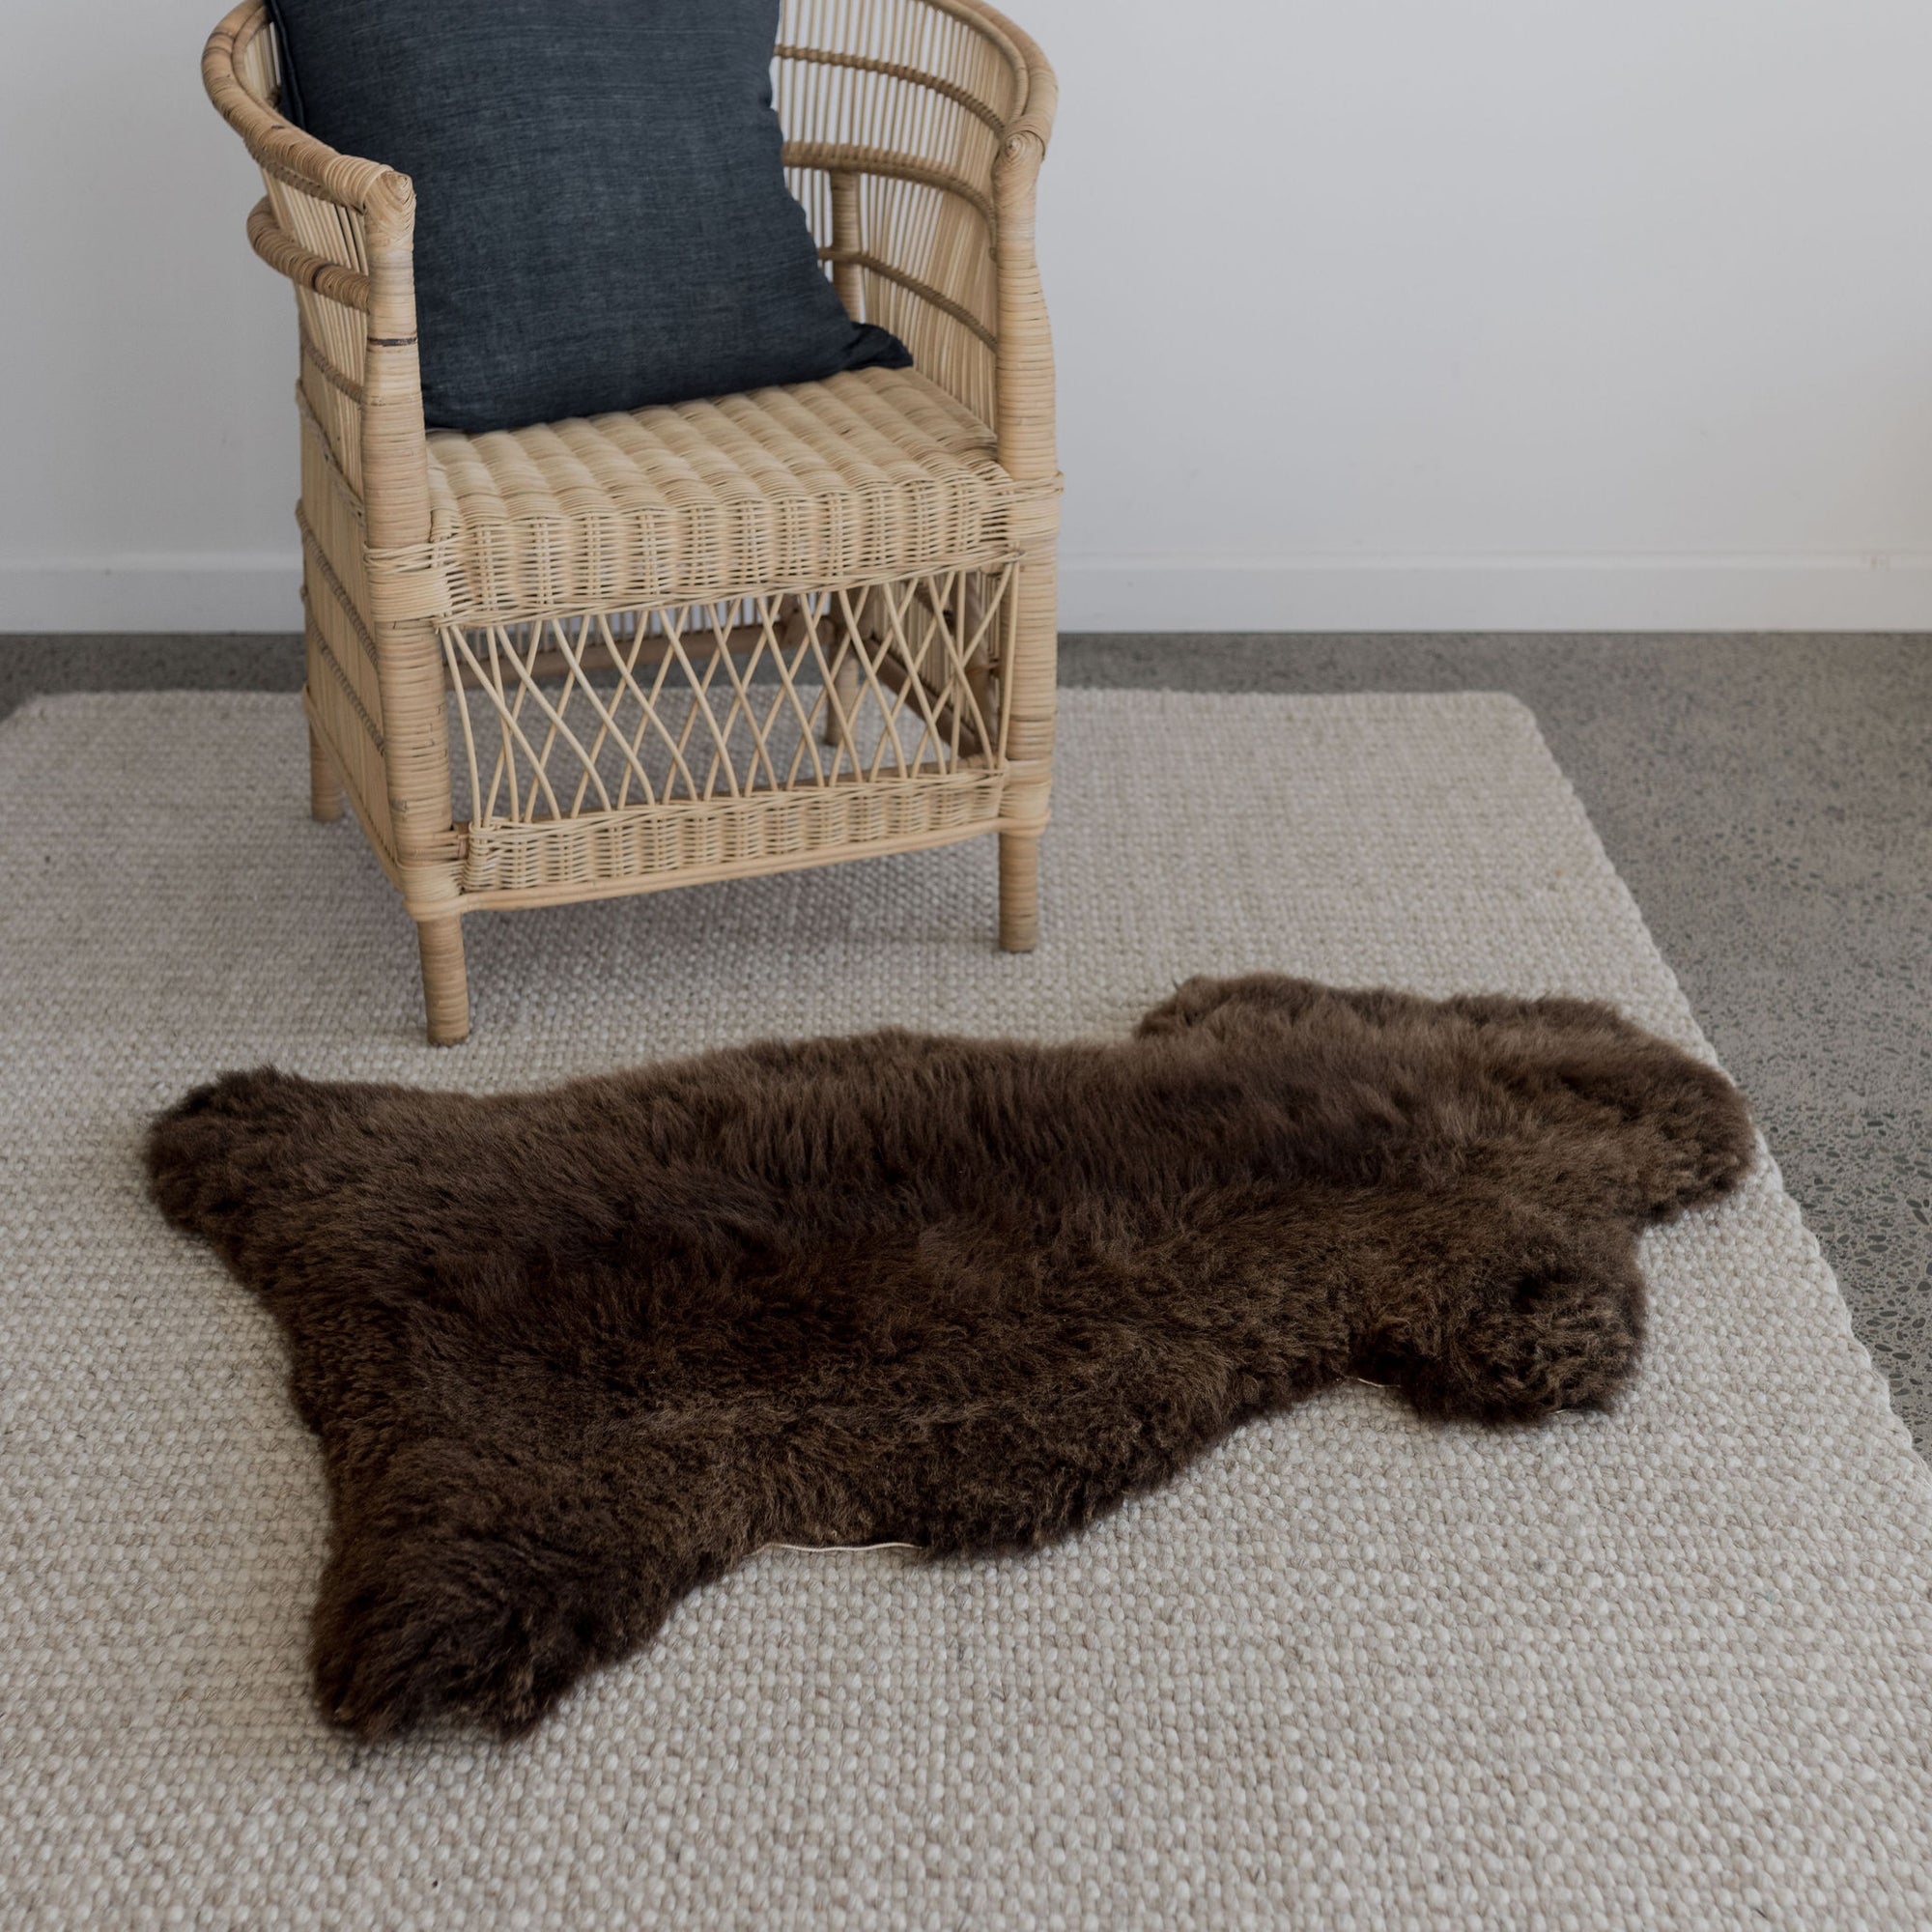 brown nz sheepskin rug from corovado furniture and homewares online store